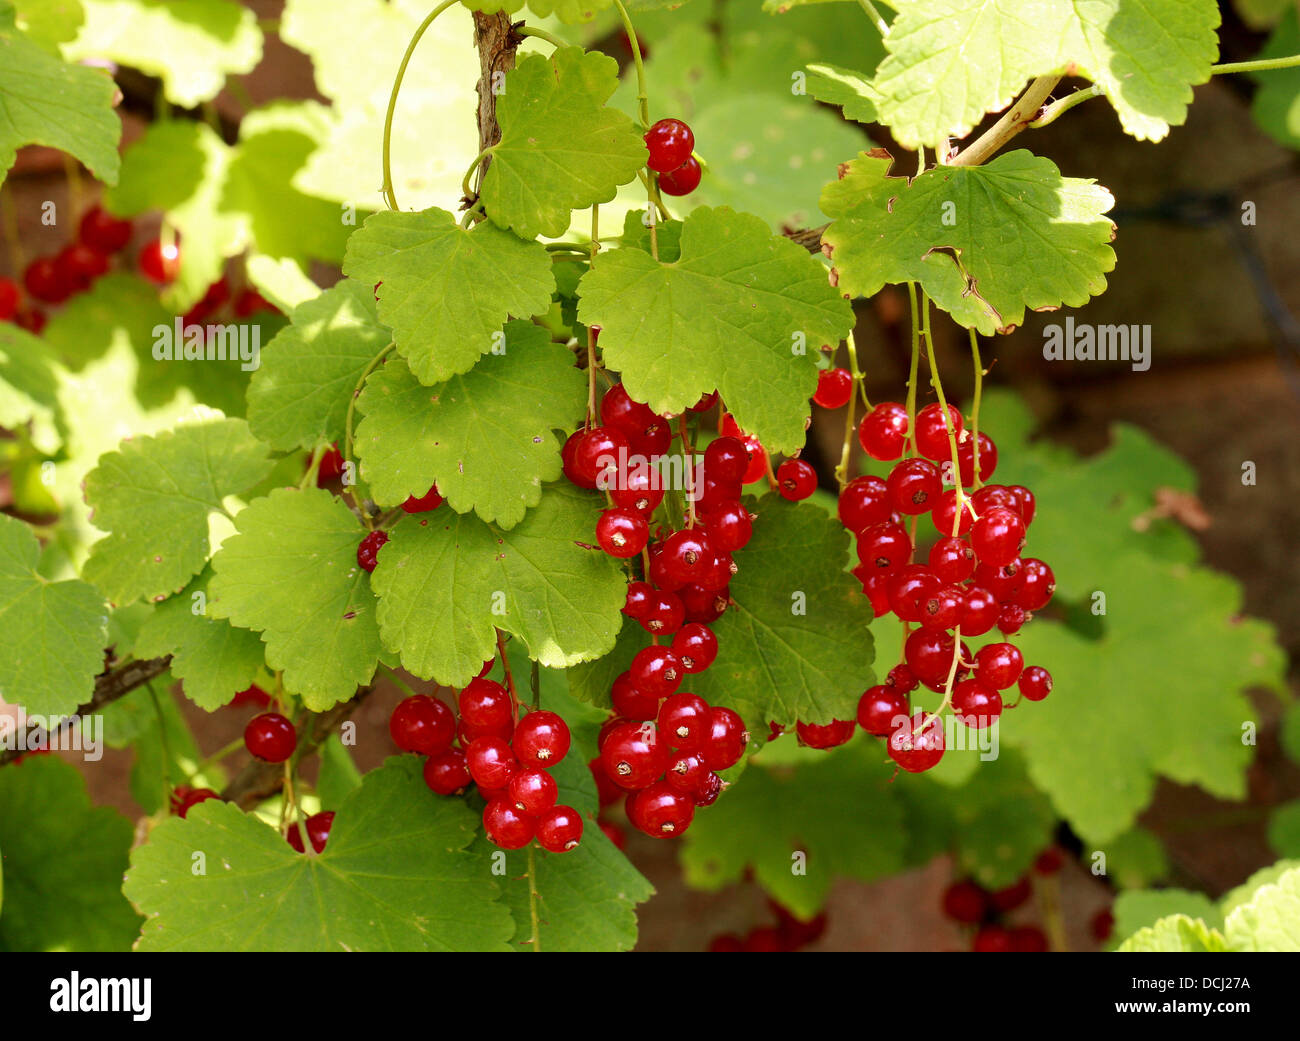 Redcurrant (or Red Currant) Fruit, Ribes rubrum, Grossulariaceae Stock Photo